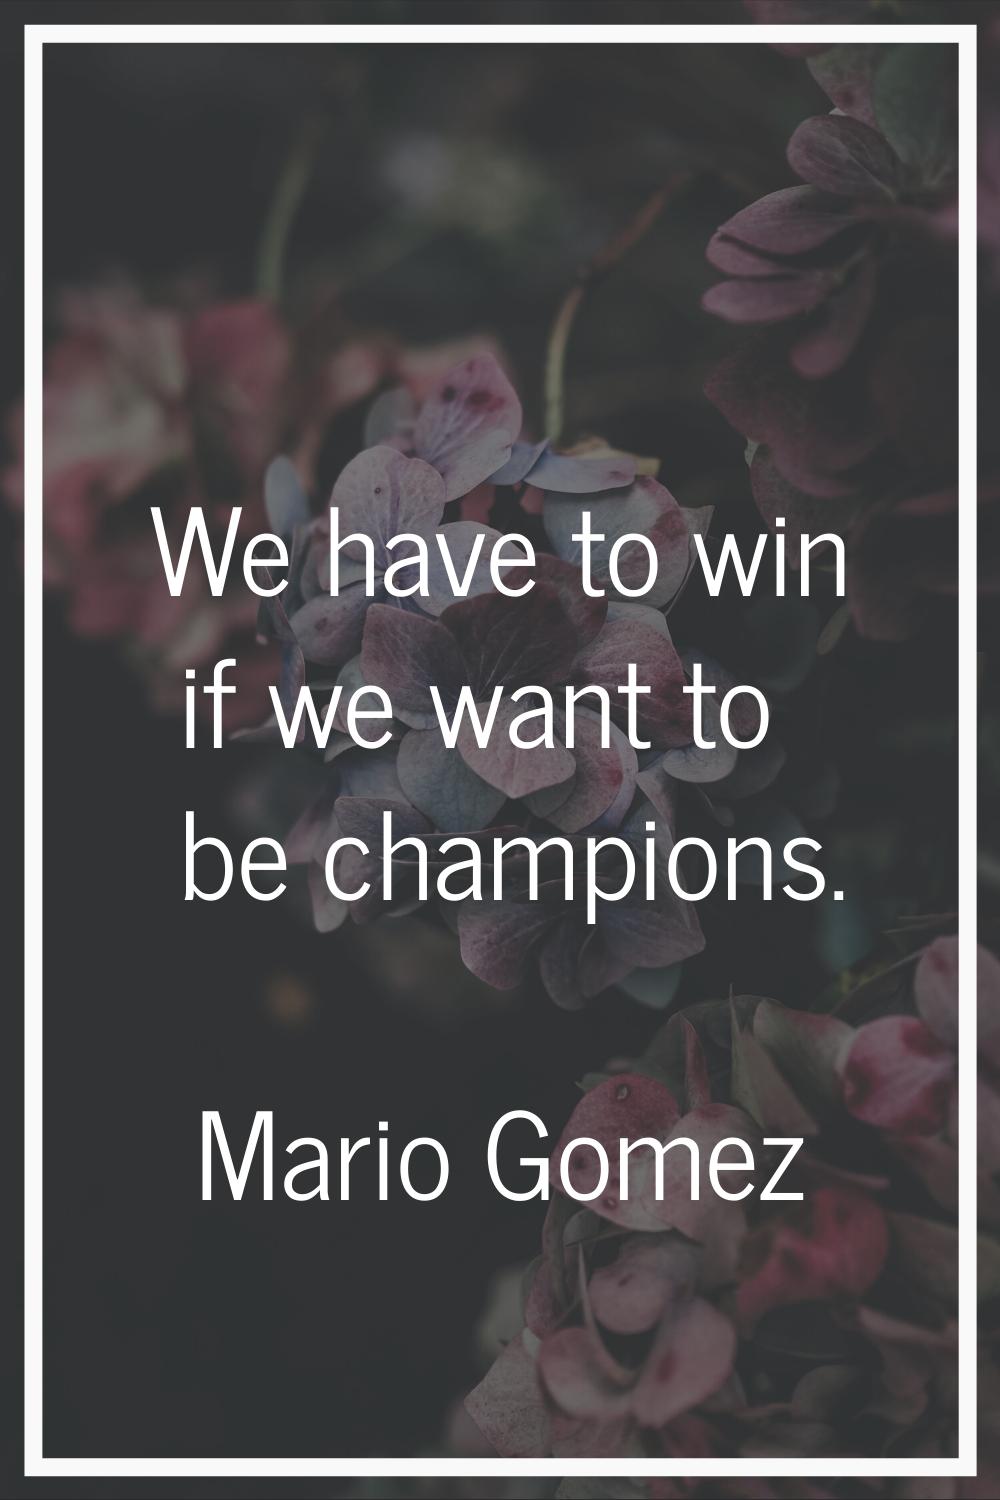 We have to win if we want to be champions.